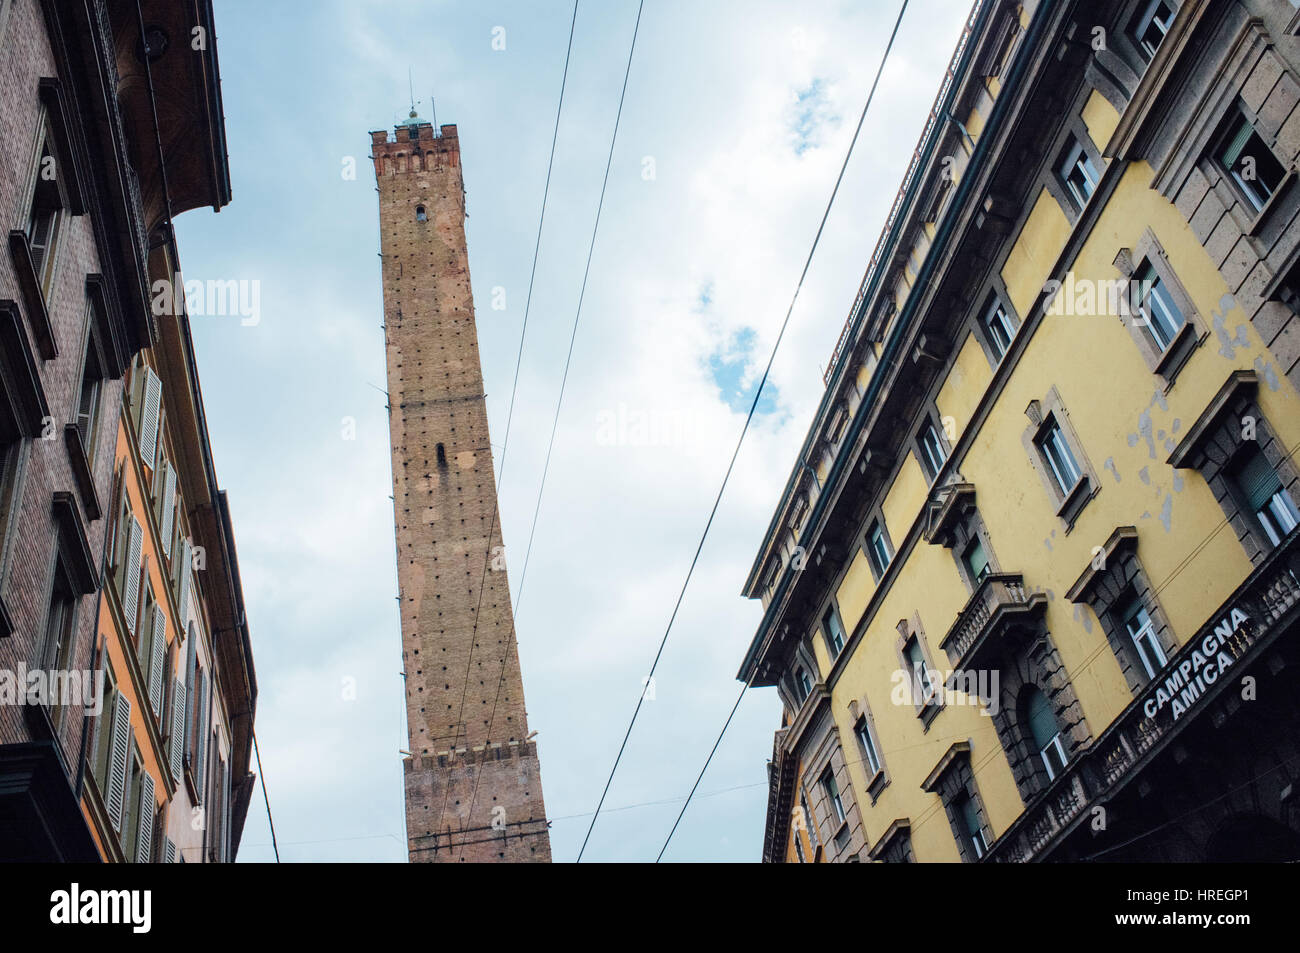 The Prendiparte Tower also known as Torre Degli Asinelli in Bologna, Italy. Stock Photo